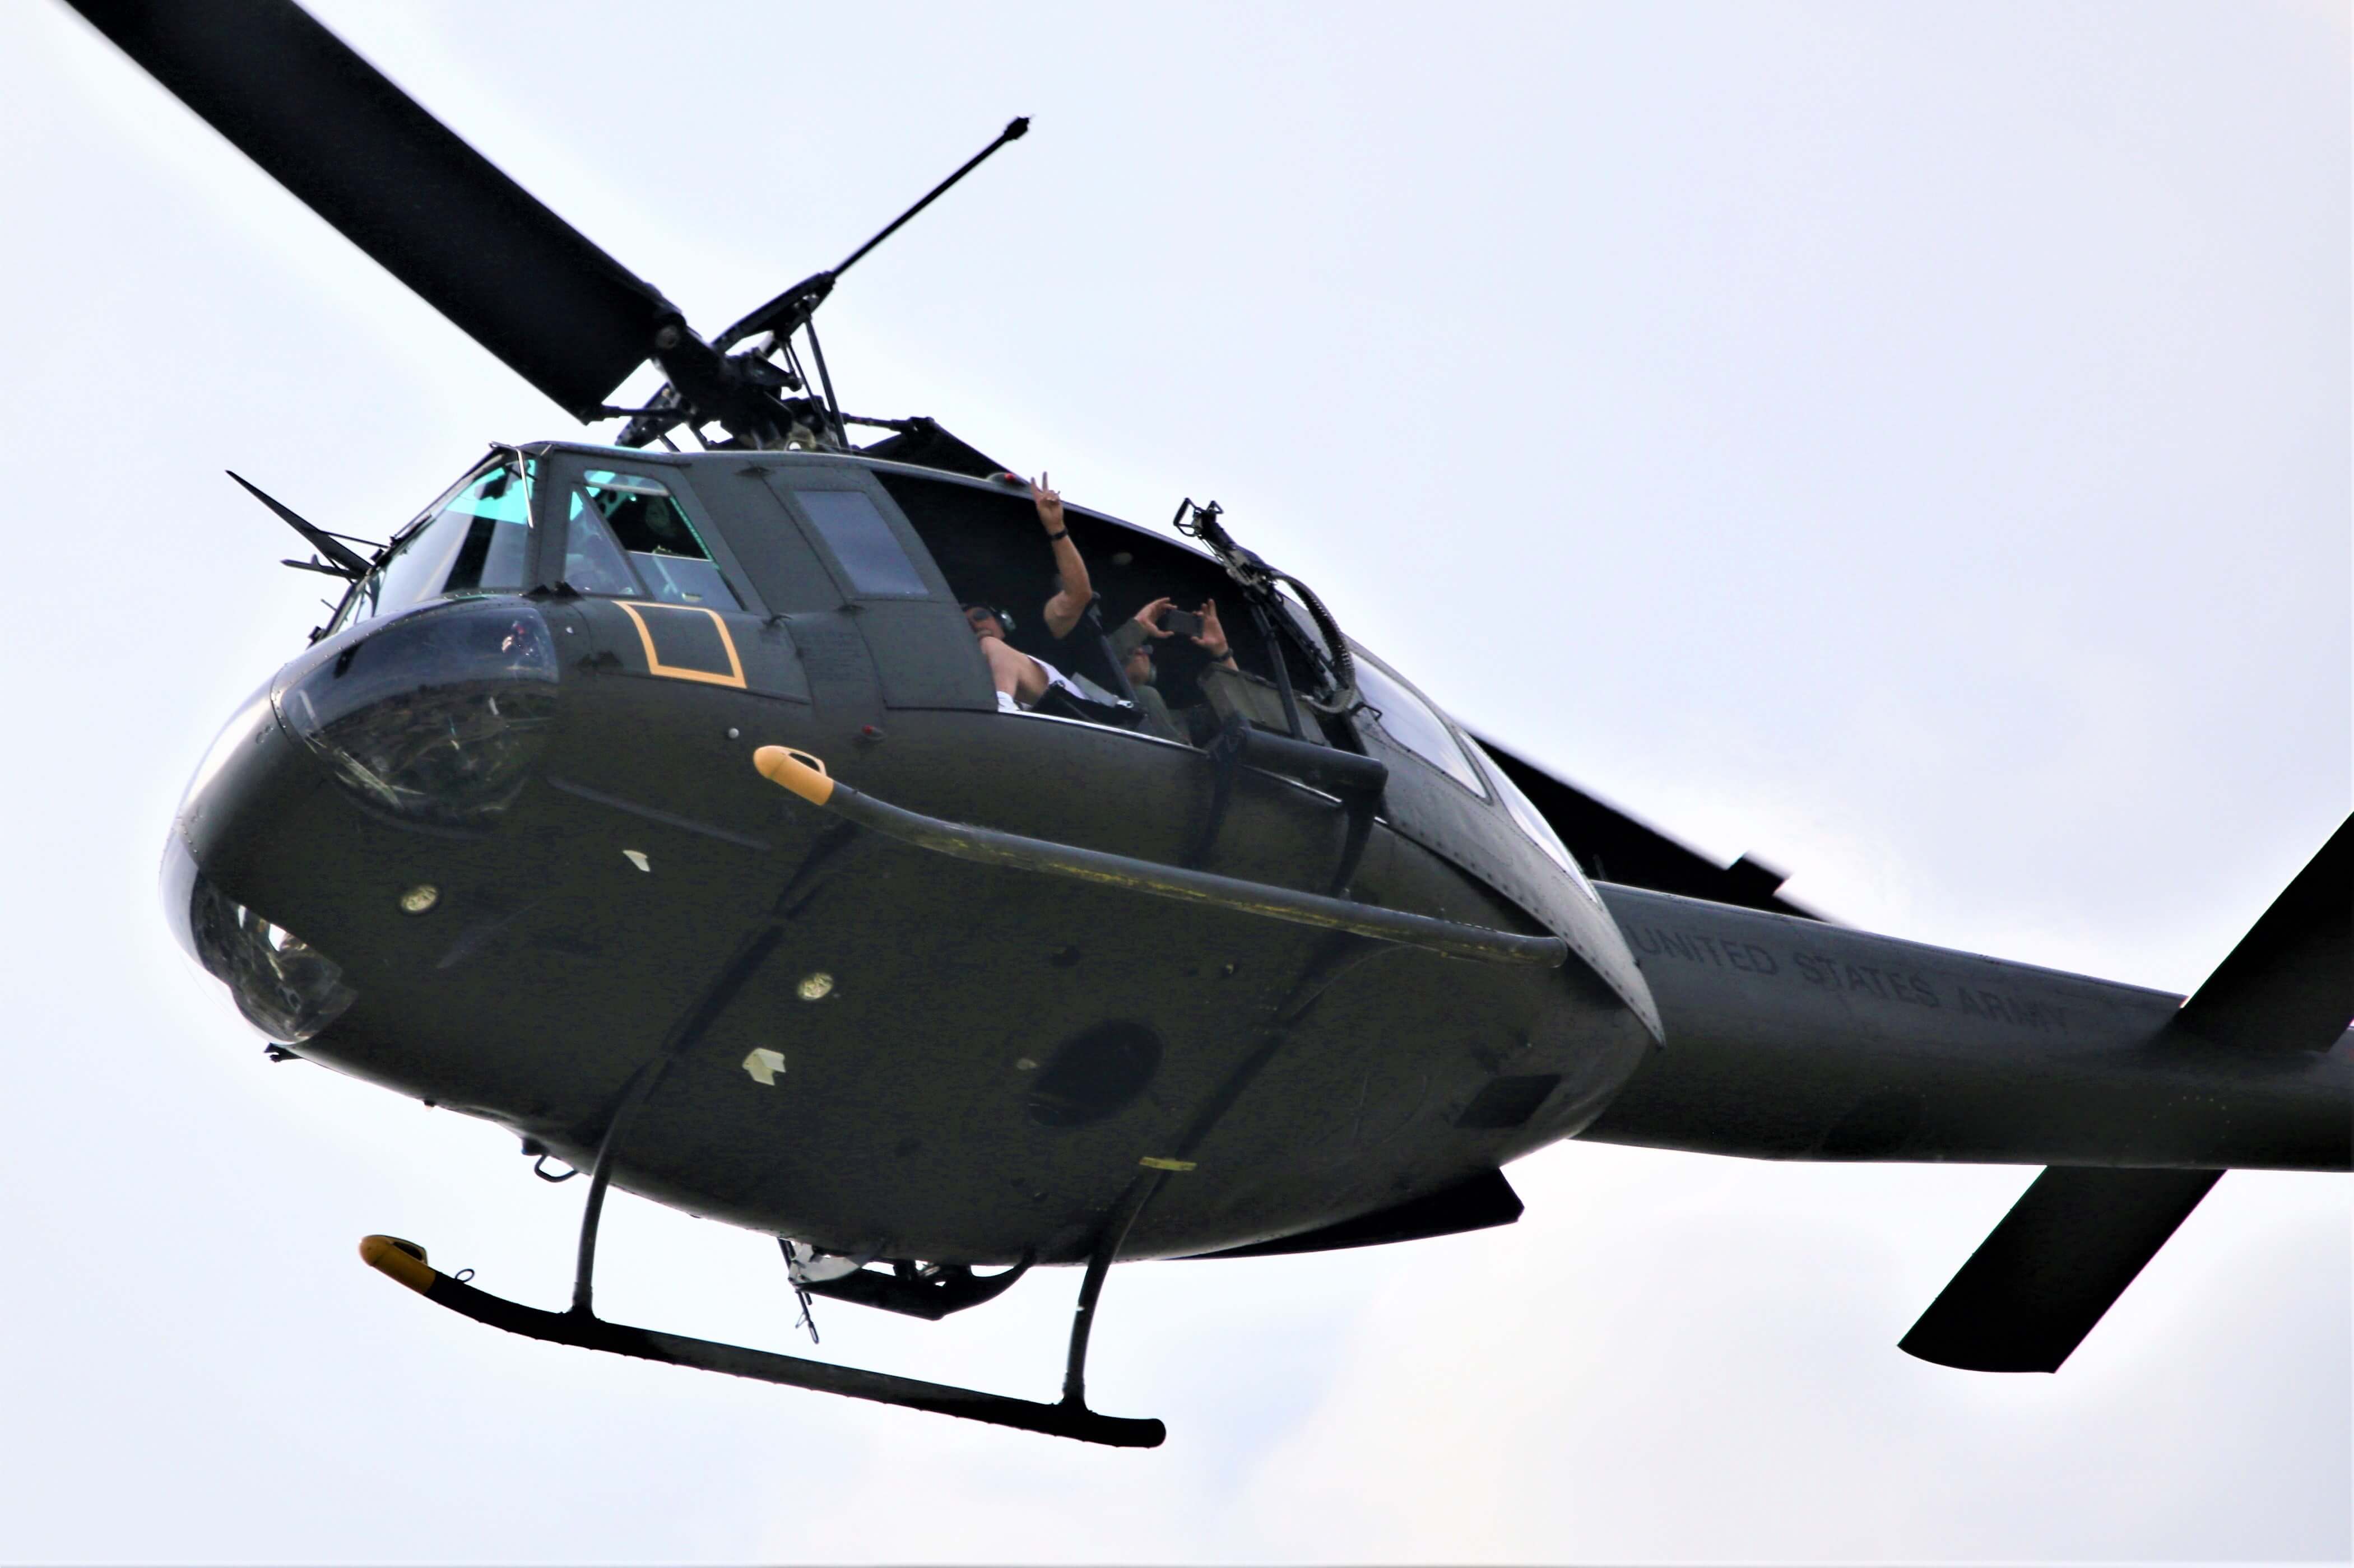 Huey Helicopter during a Flyover